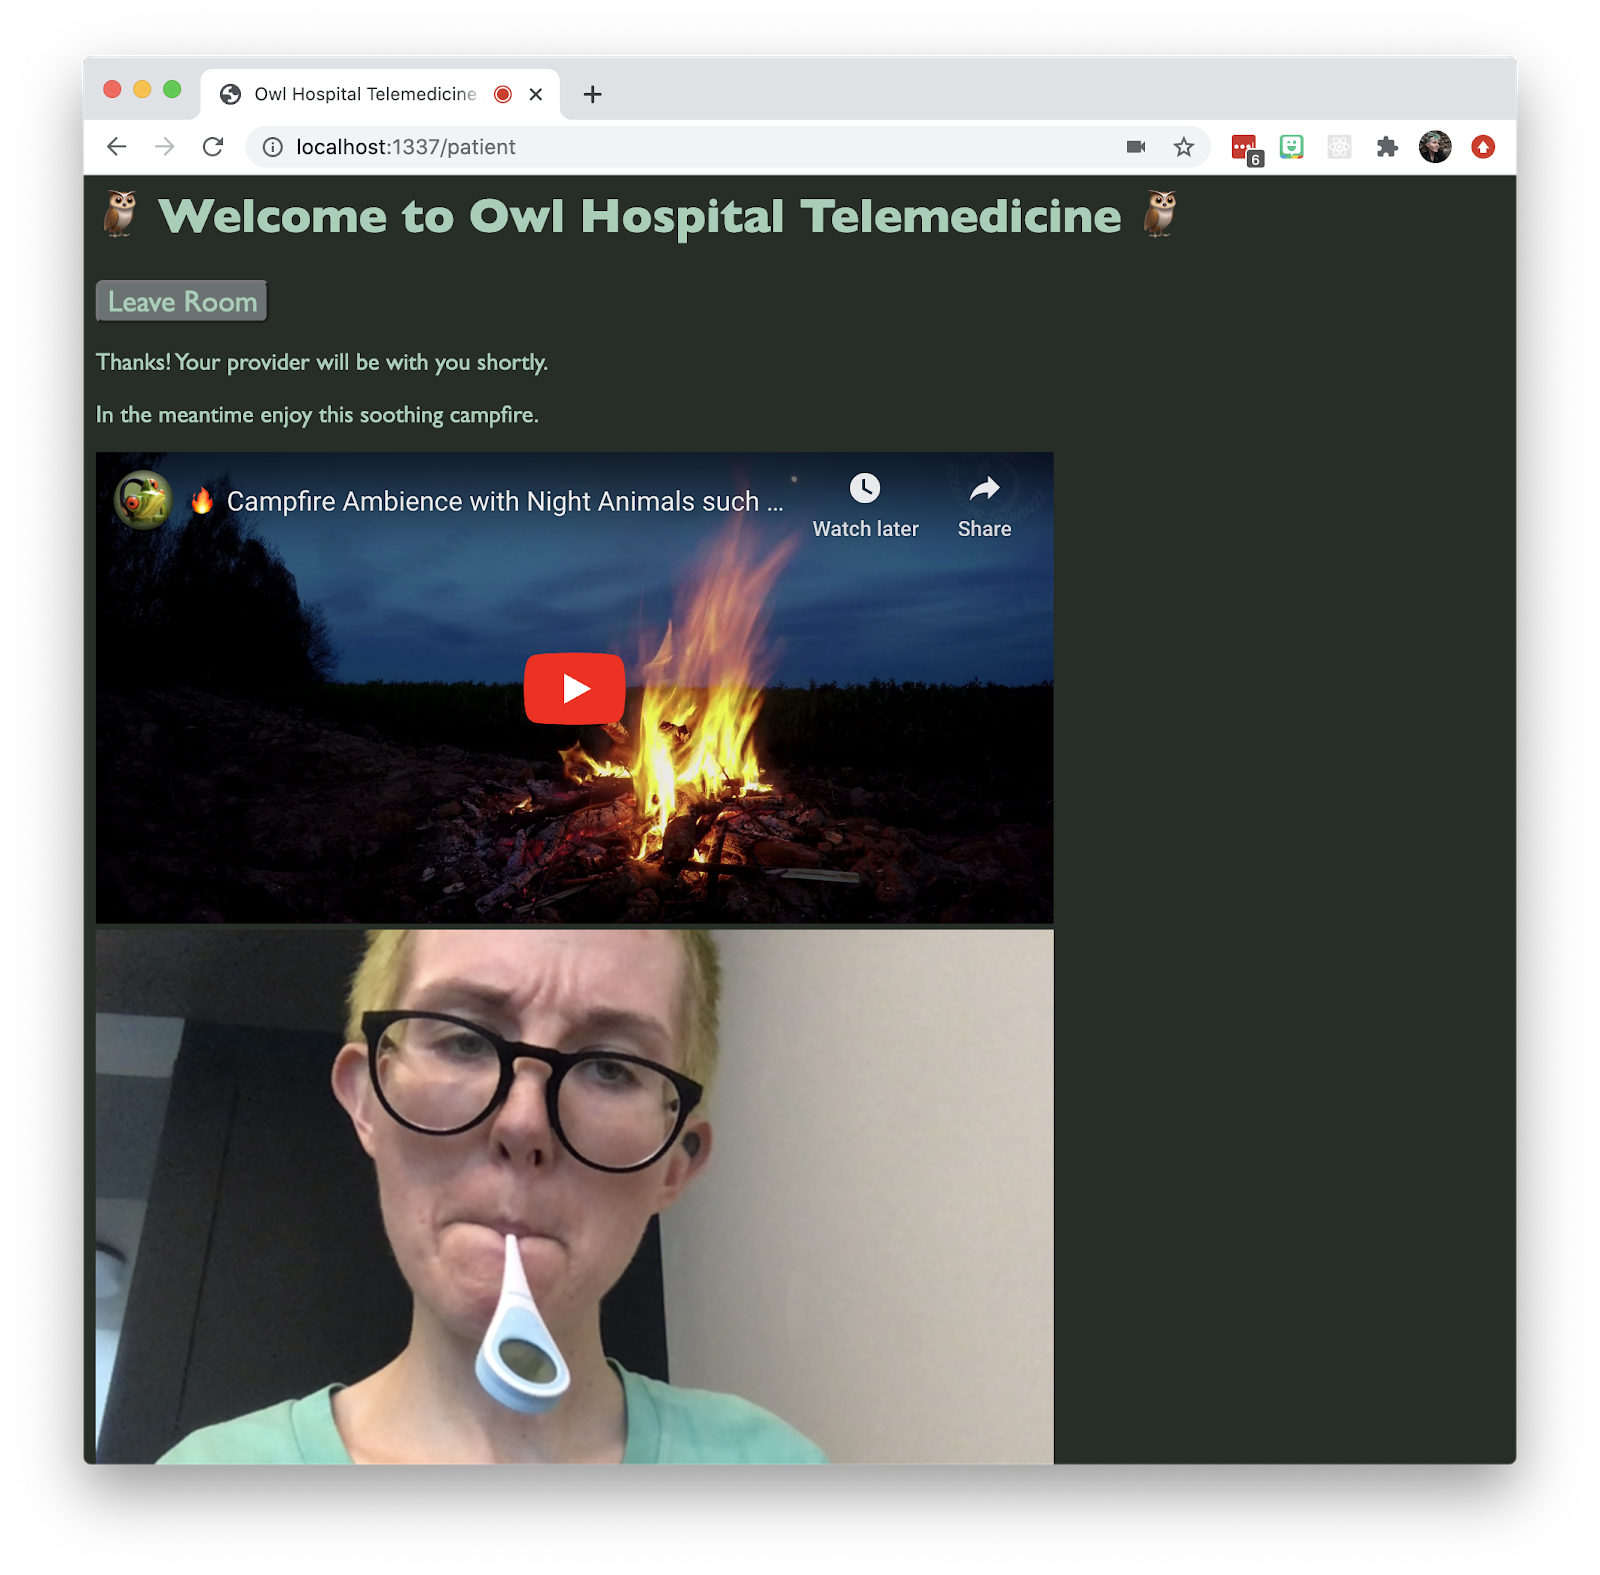 Screenshot of a Twilio Video telemedicine app. There is a non-binary person in the video chat, that has a thermometer in their mouth and a pensive expression. The text on the page says "Thanks! Your provider will be with you shortly. In the meantime enjoy this soothing campfire." There is an embedded YouTube video of a campfire.